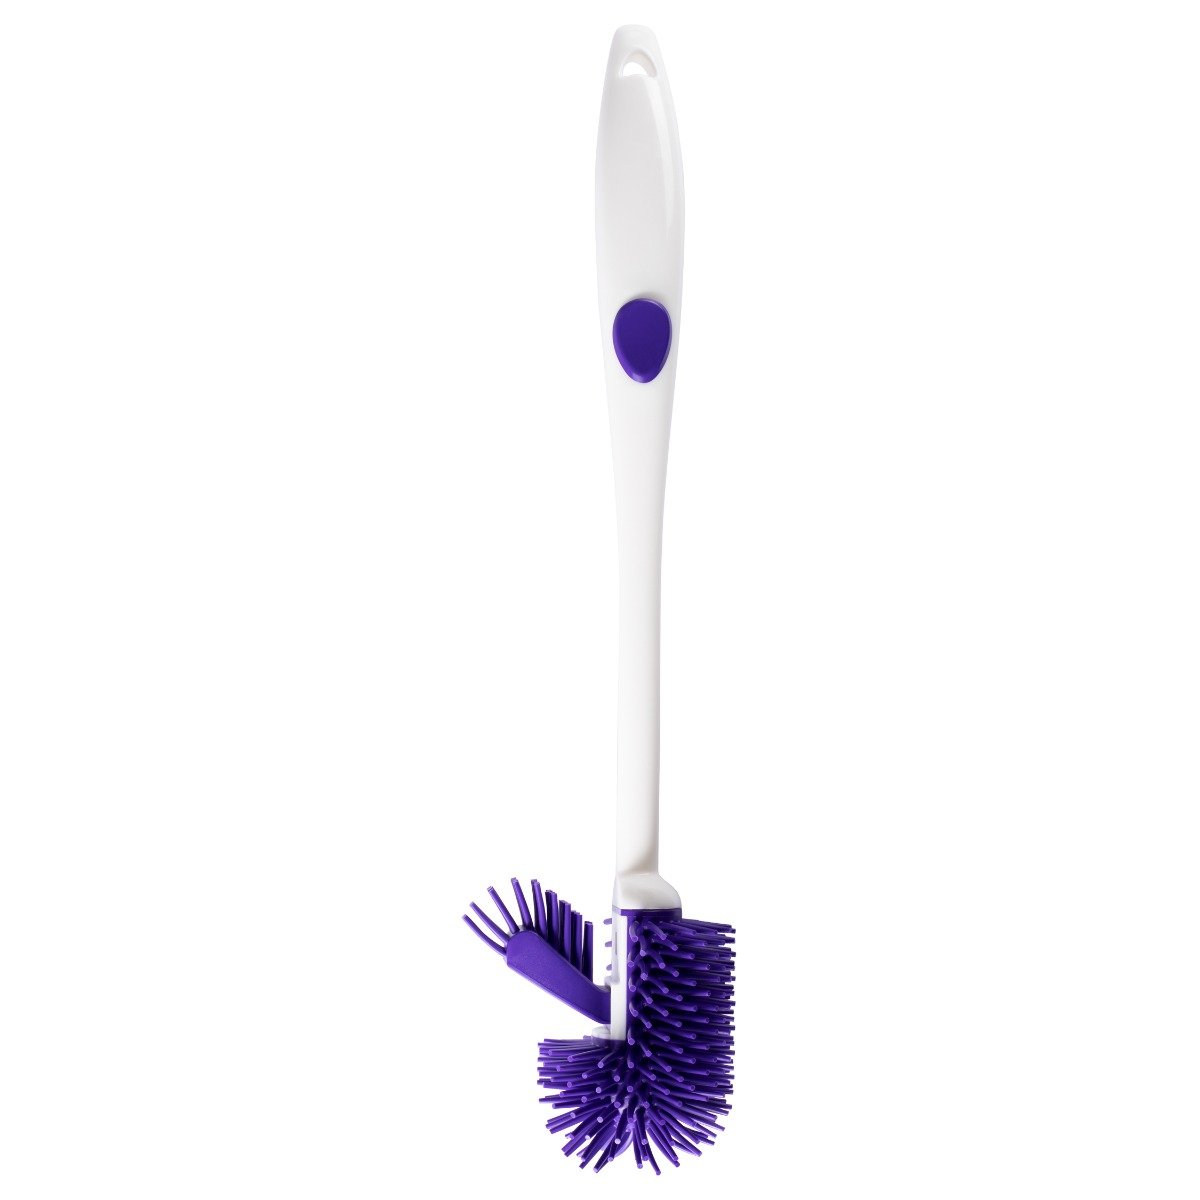 the ultimate toilet brush